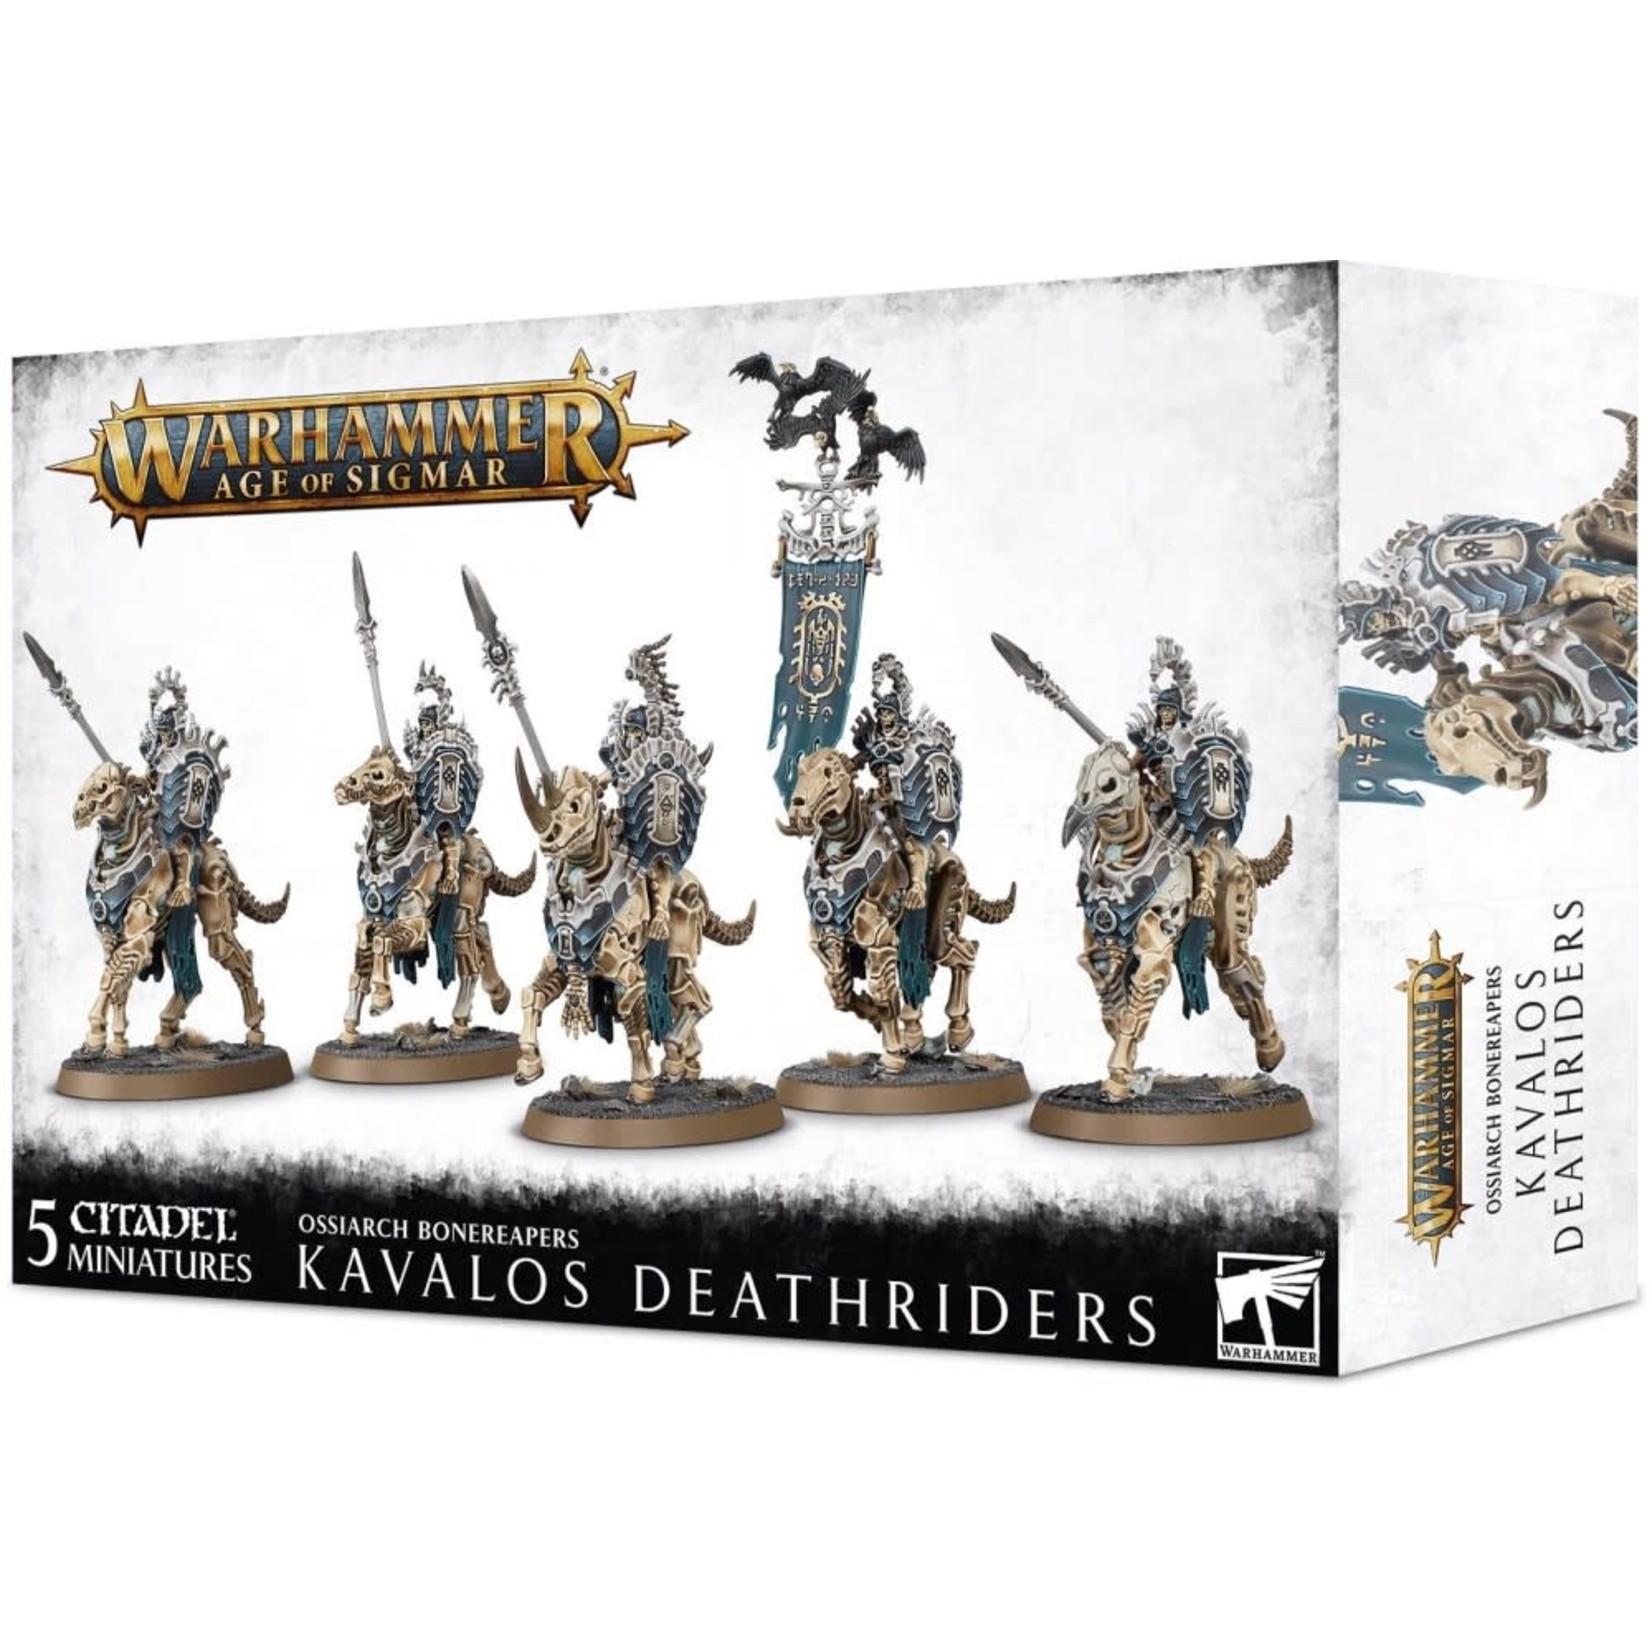 Soulblight Gravelords Ossiarch Bonereapers Kavalos Deathriders